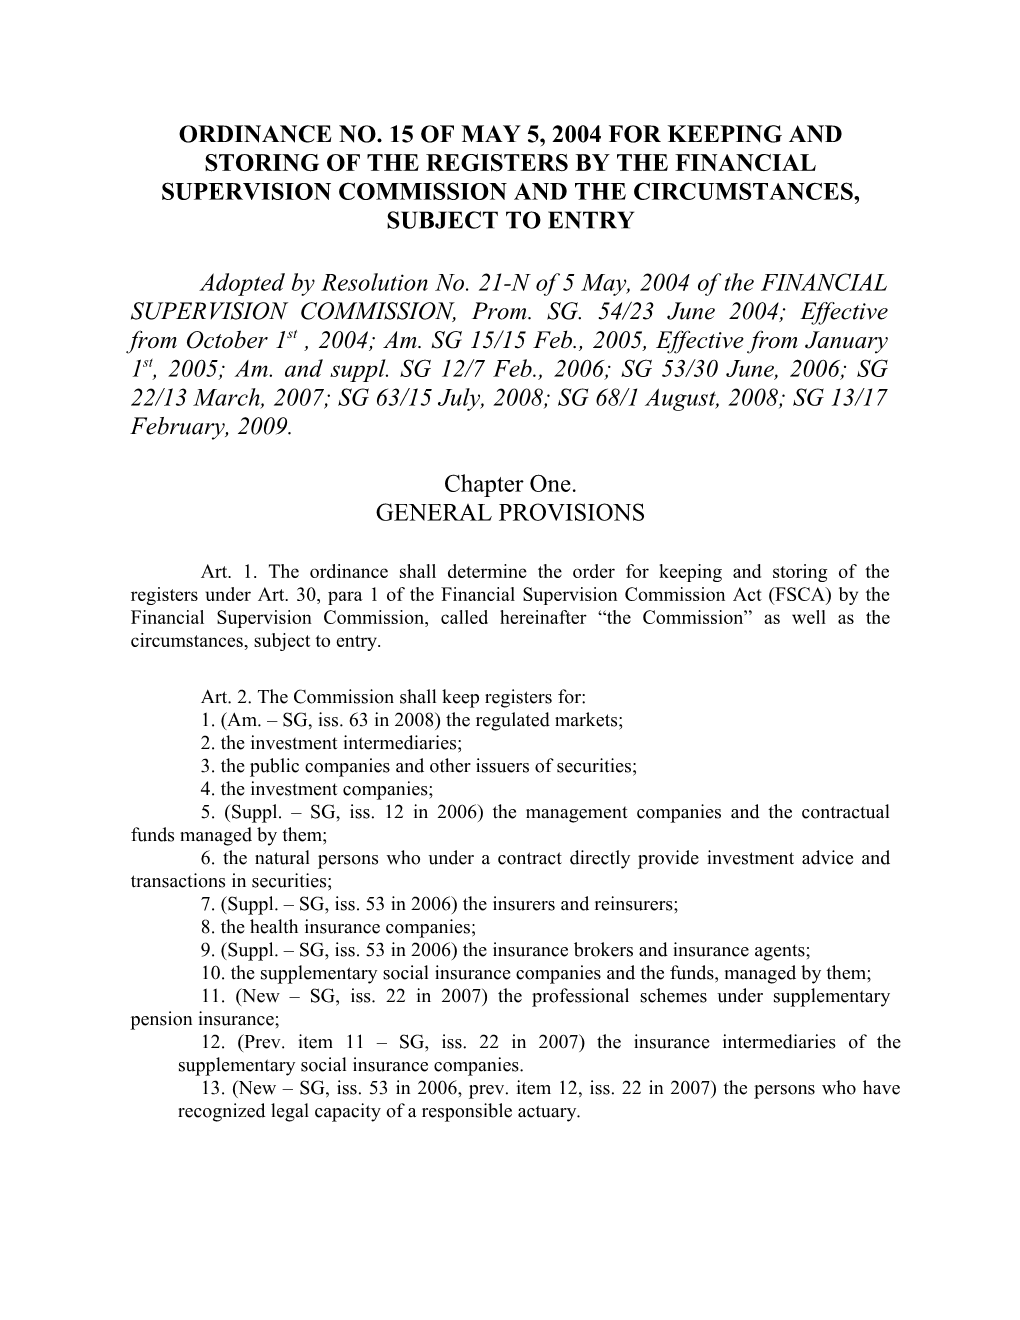 Ordinance No 15 of May 5, 2004 for Keeping and Preserving of the Registers by the Commission